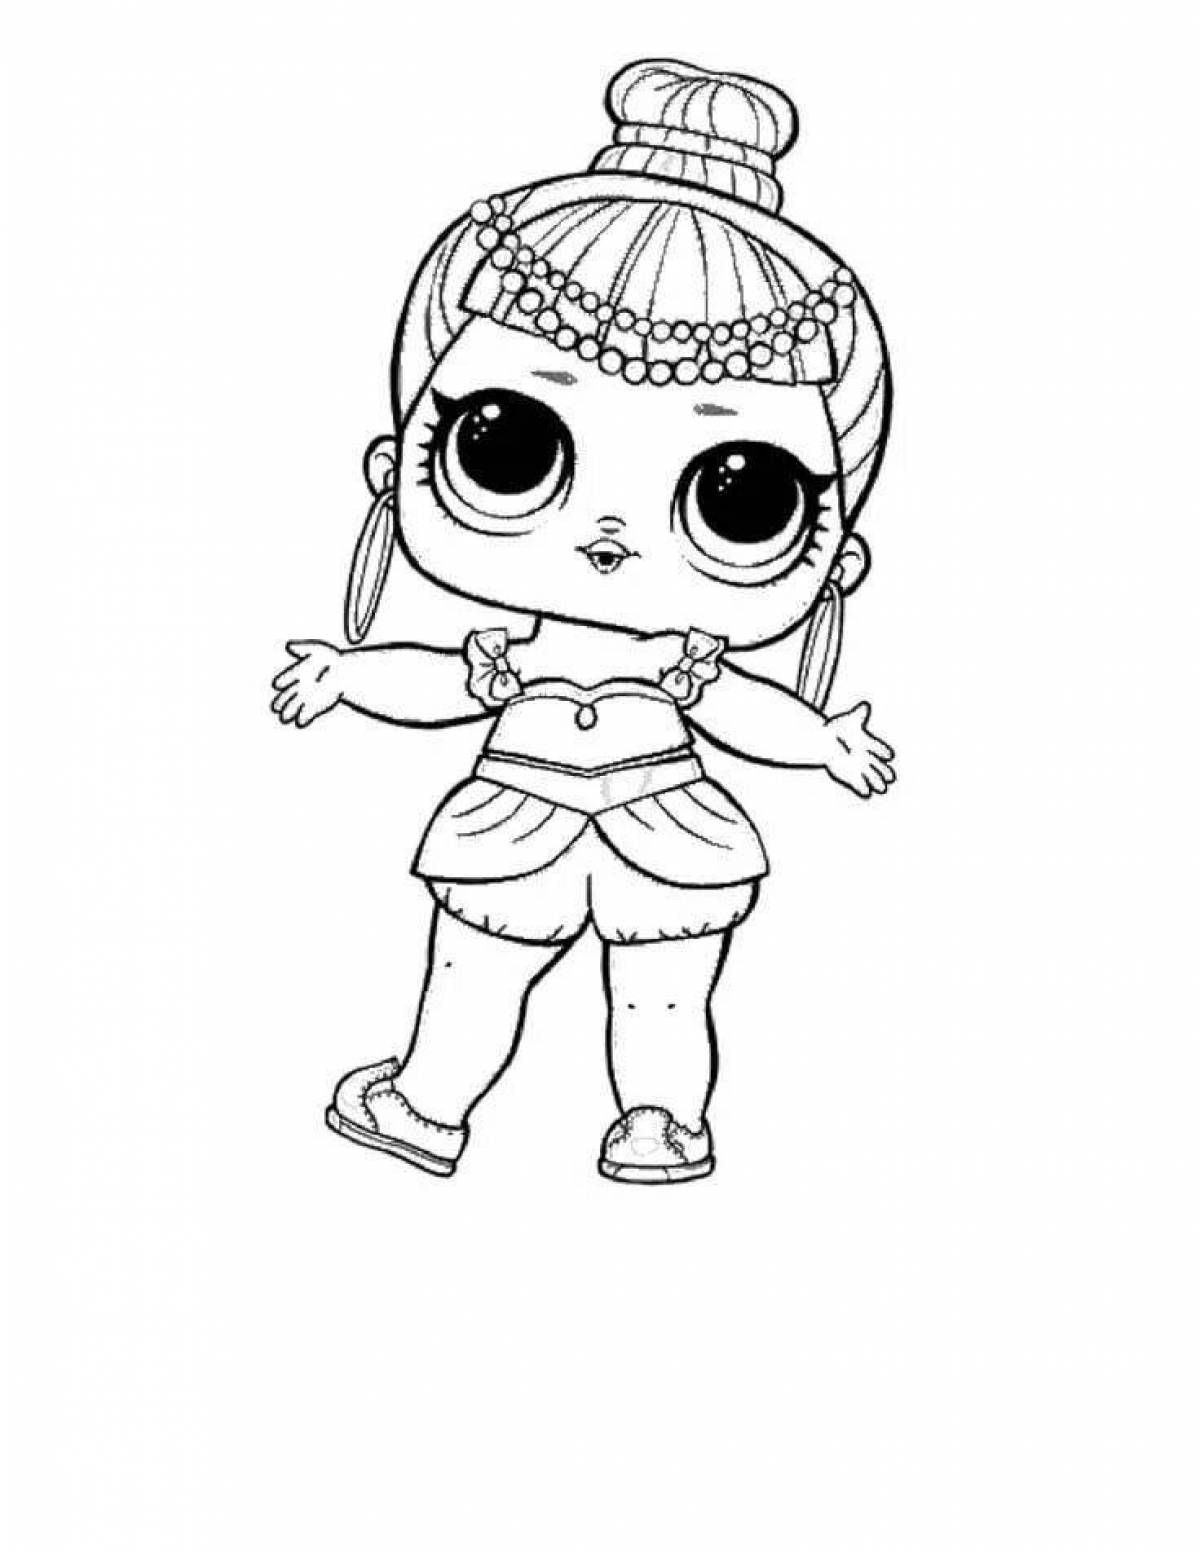 Creative print lol doll coloring page